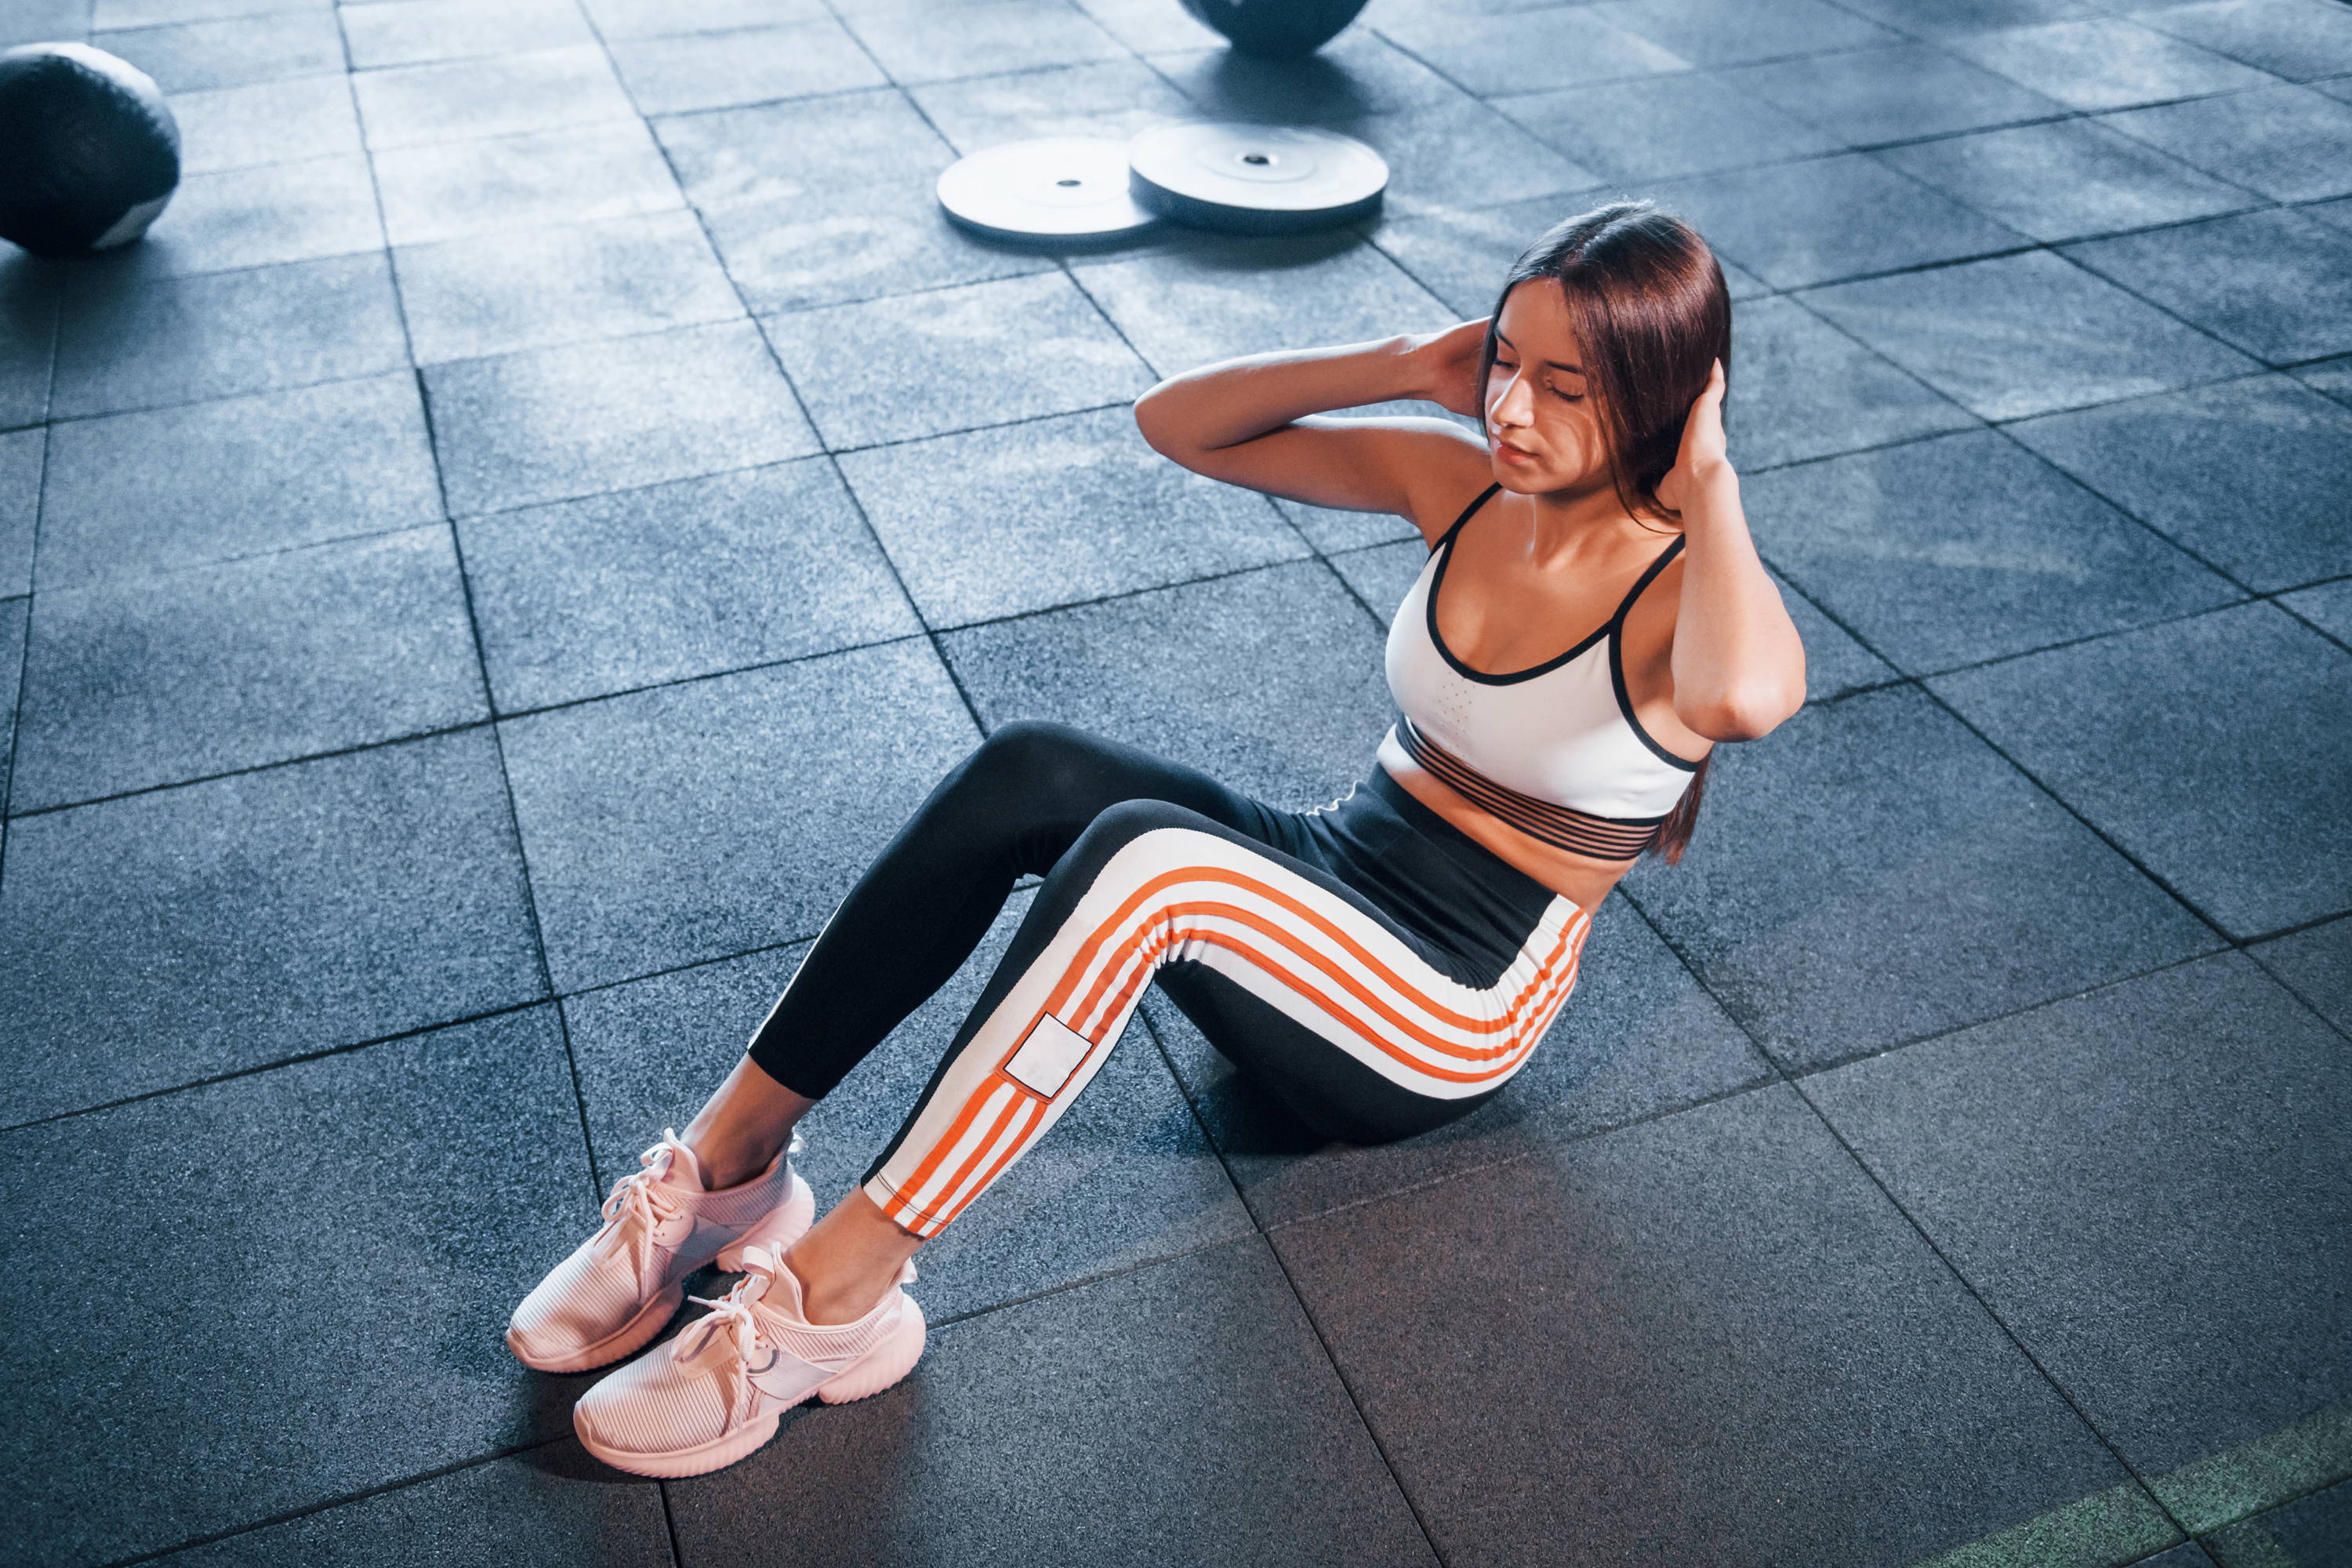 A girl doing a sit-up while sitting on black rubber gym flooring tiles.